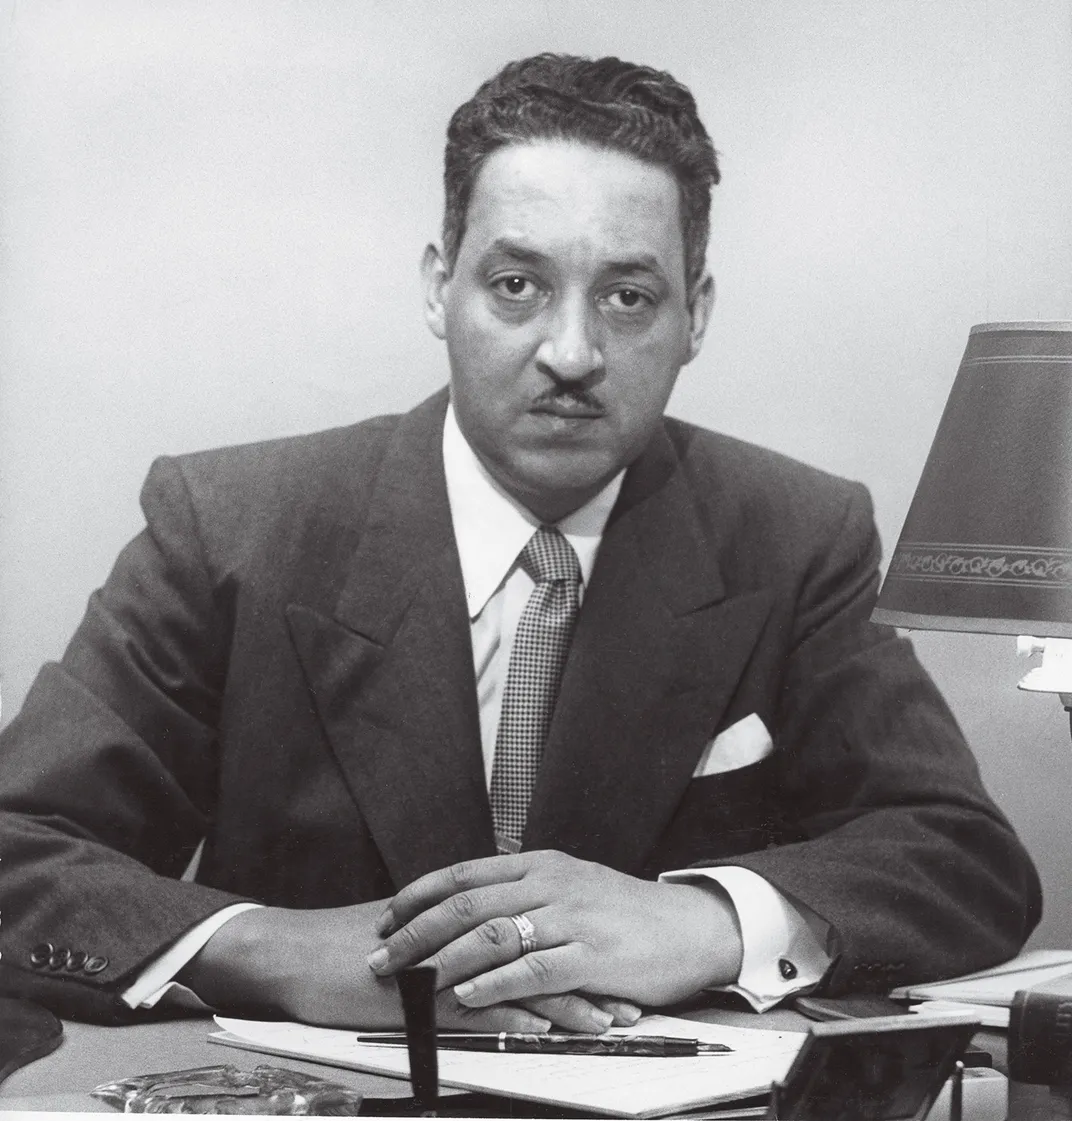 a portrait of a man in a suite sitting at a desk